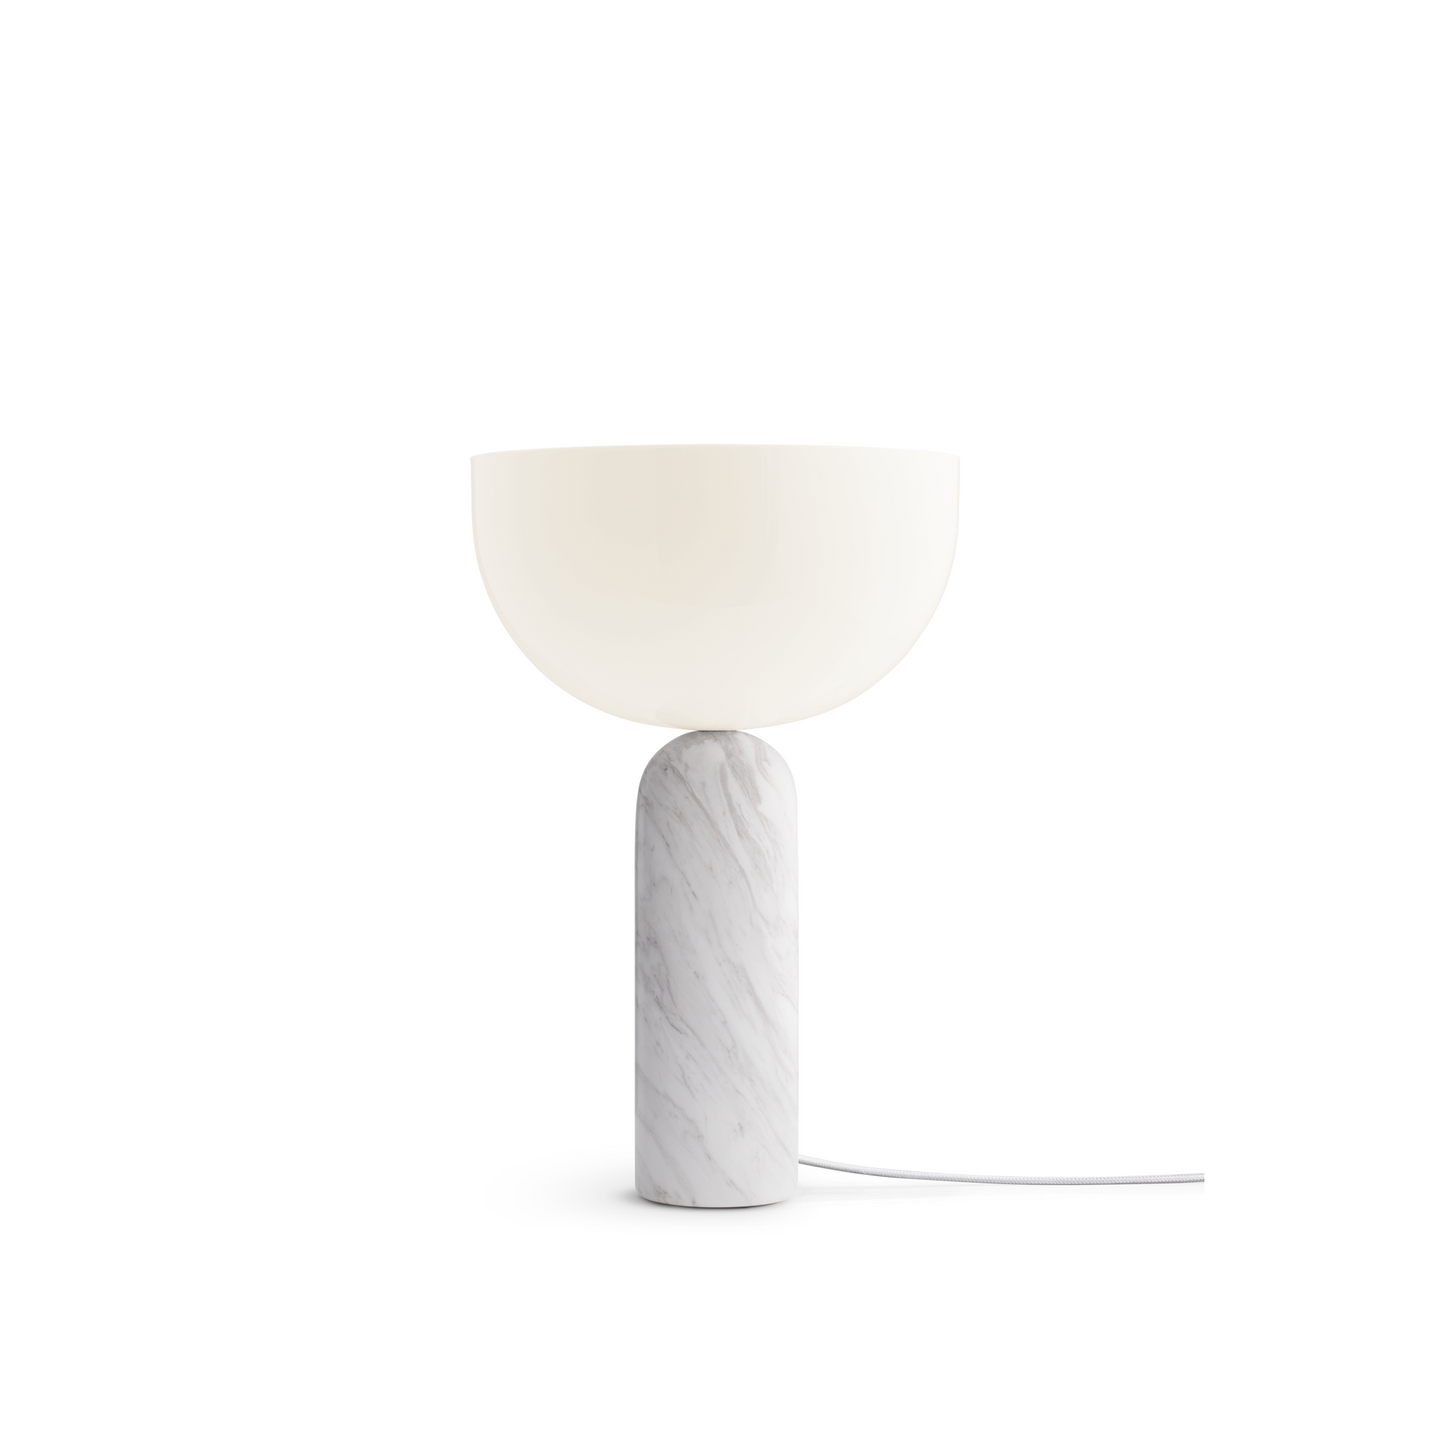 Kizu Table Lamp Big by NEW WORKS #White Marble